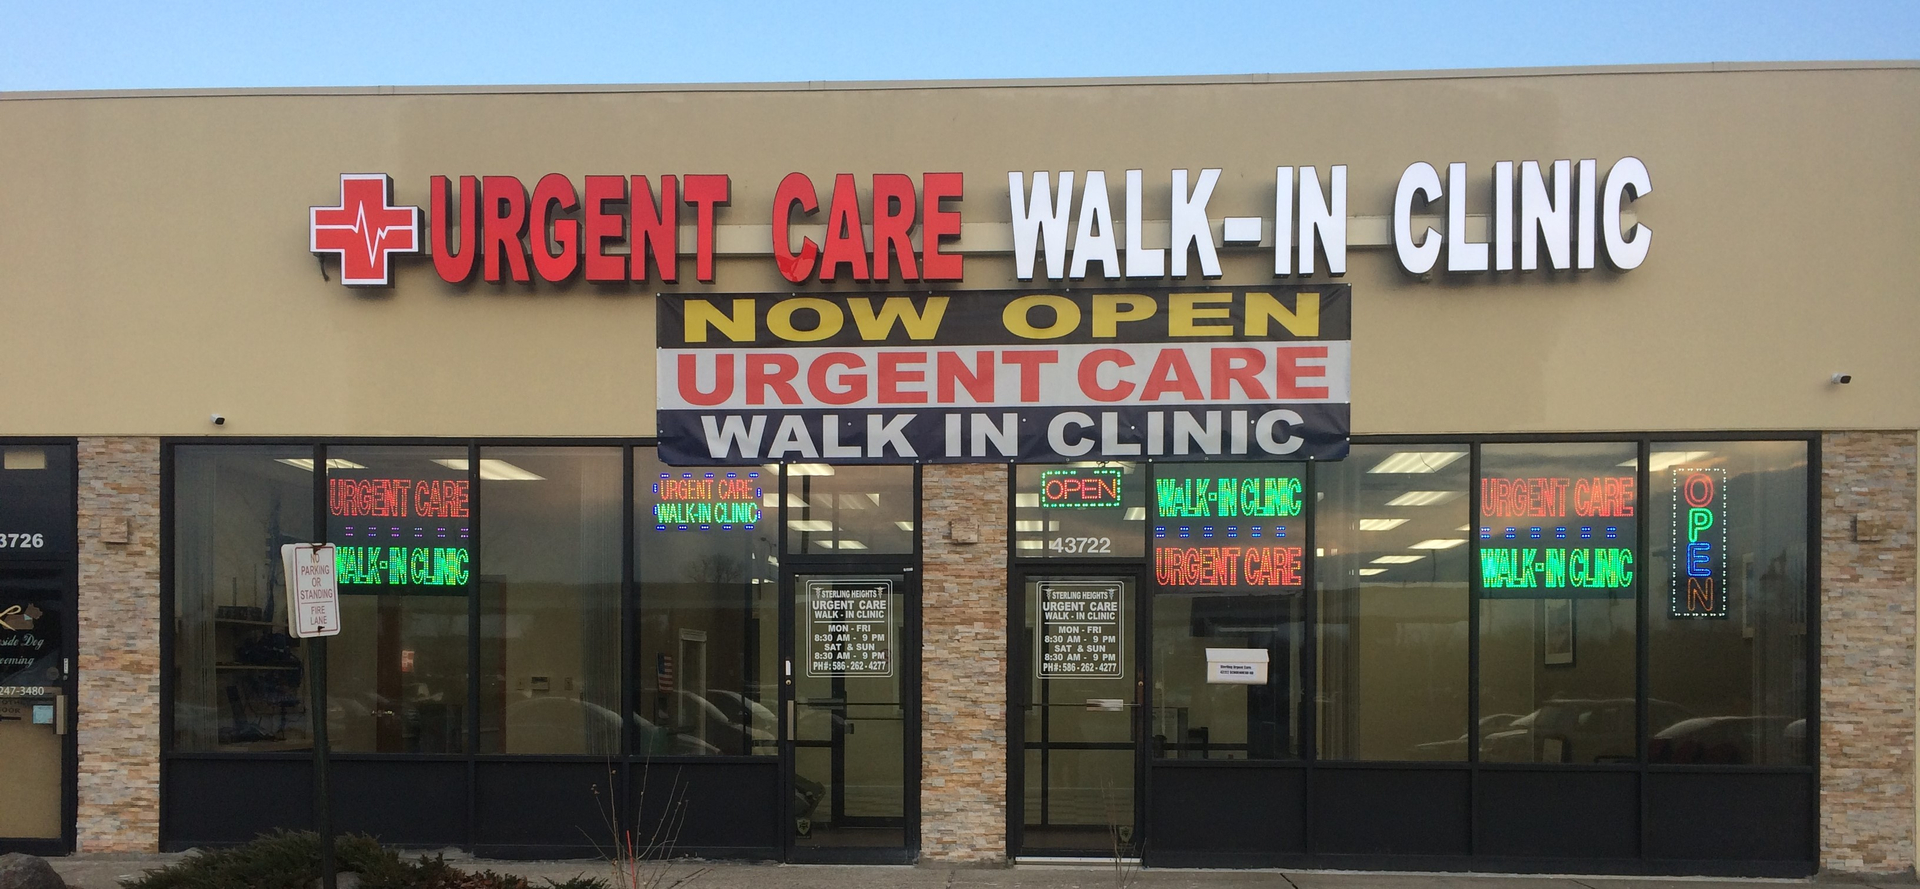 Doctors Urgent Care Walk-in Clinic - Sterling Heights reviews | 43722 Schoenherr Rd - Sterling Heights MI